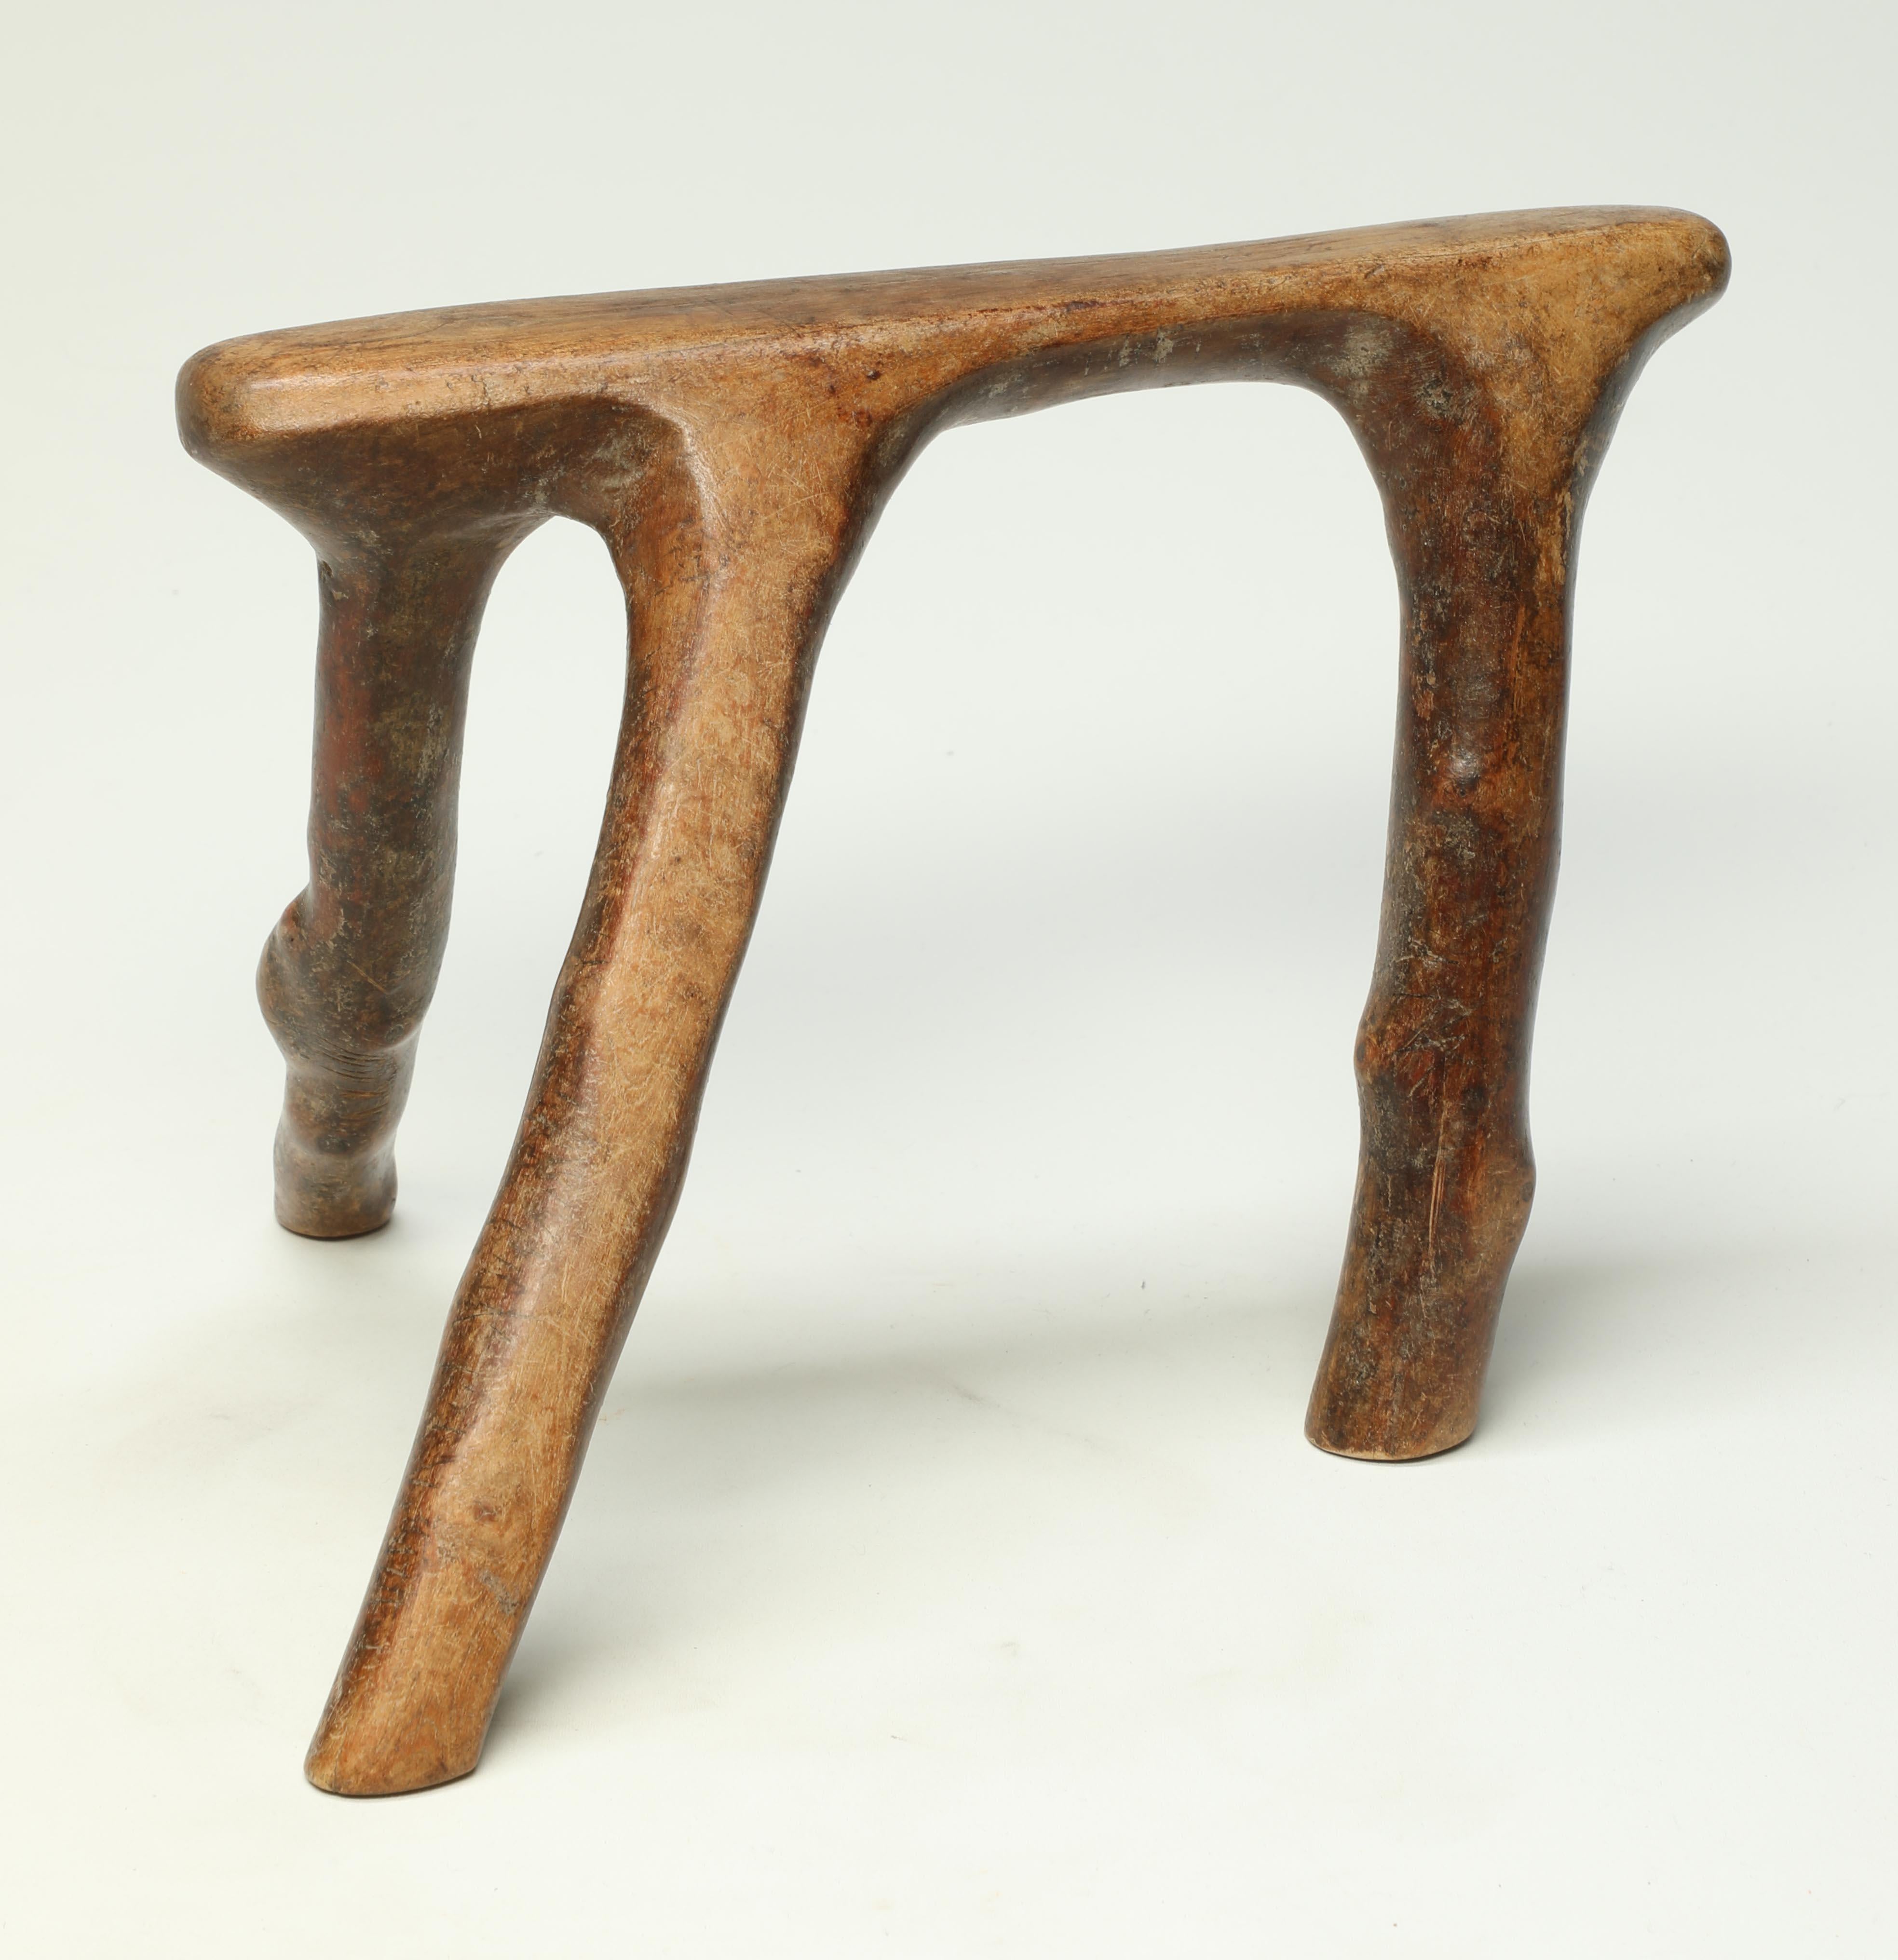 20th Century Kenya Tribal Wood Headrest, Stylized Natural Animal Form, African Old and Worn For Sale